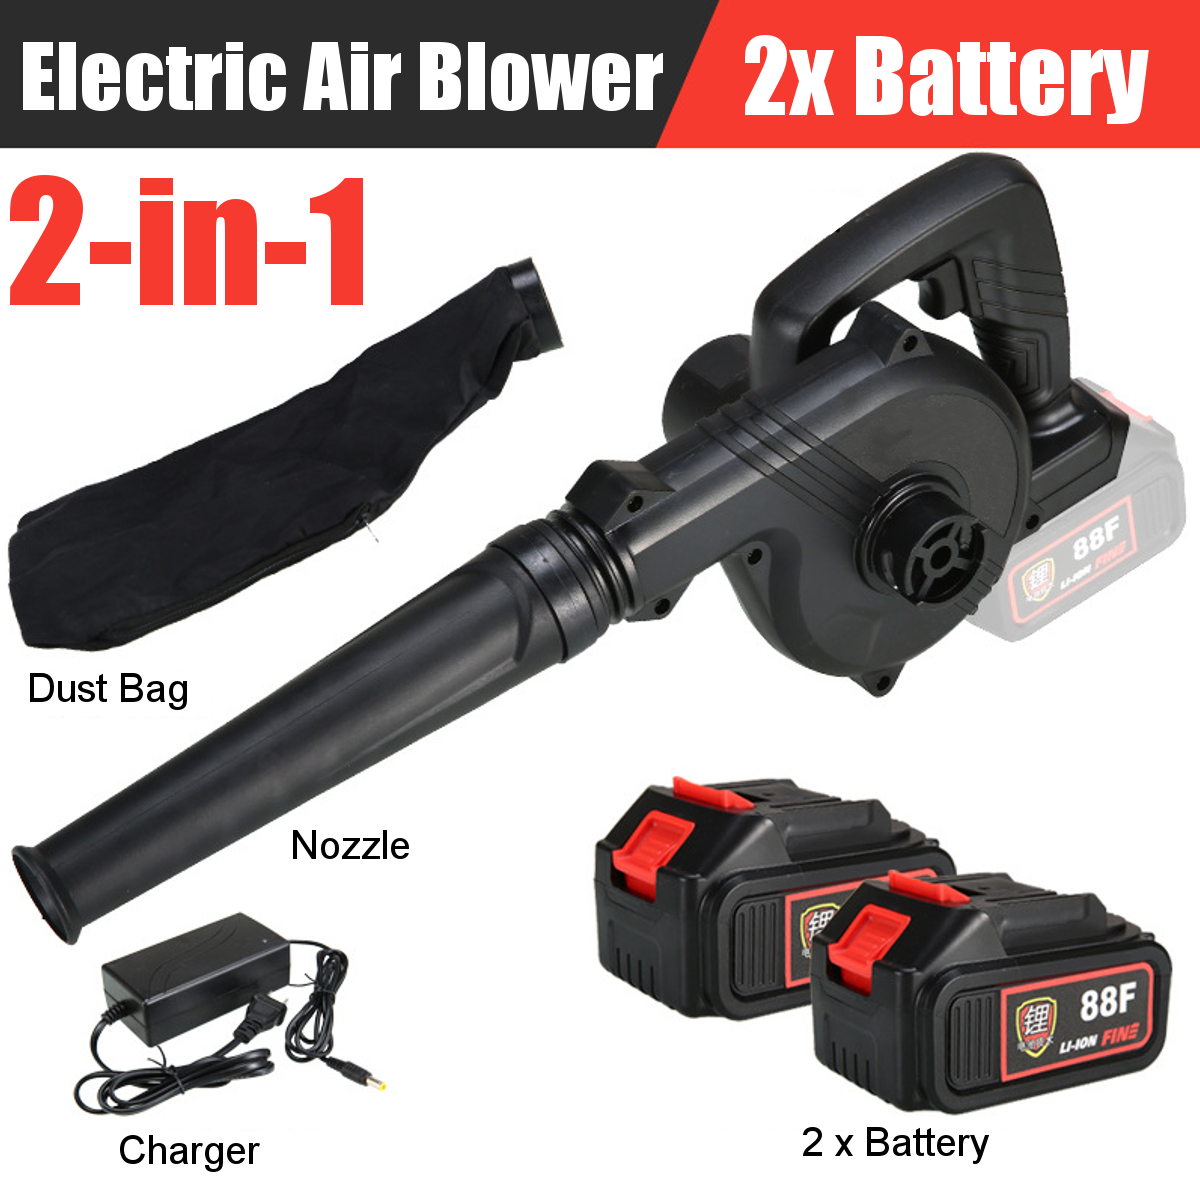 88VF-1500W-2-in-1-Electric-Air-Blower-Wireless-Vehicle-Computer-Vacuum-Dust-Collector-Leaf-Cleaner-W-1861025-8